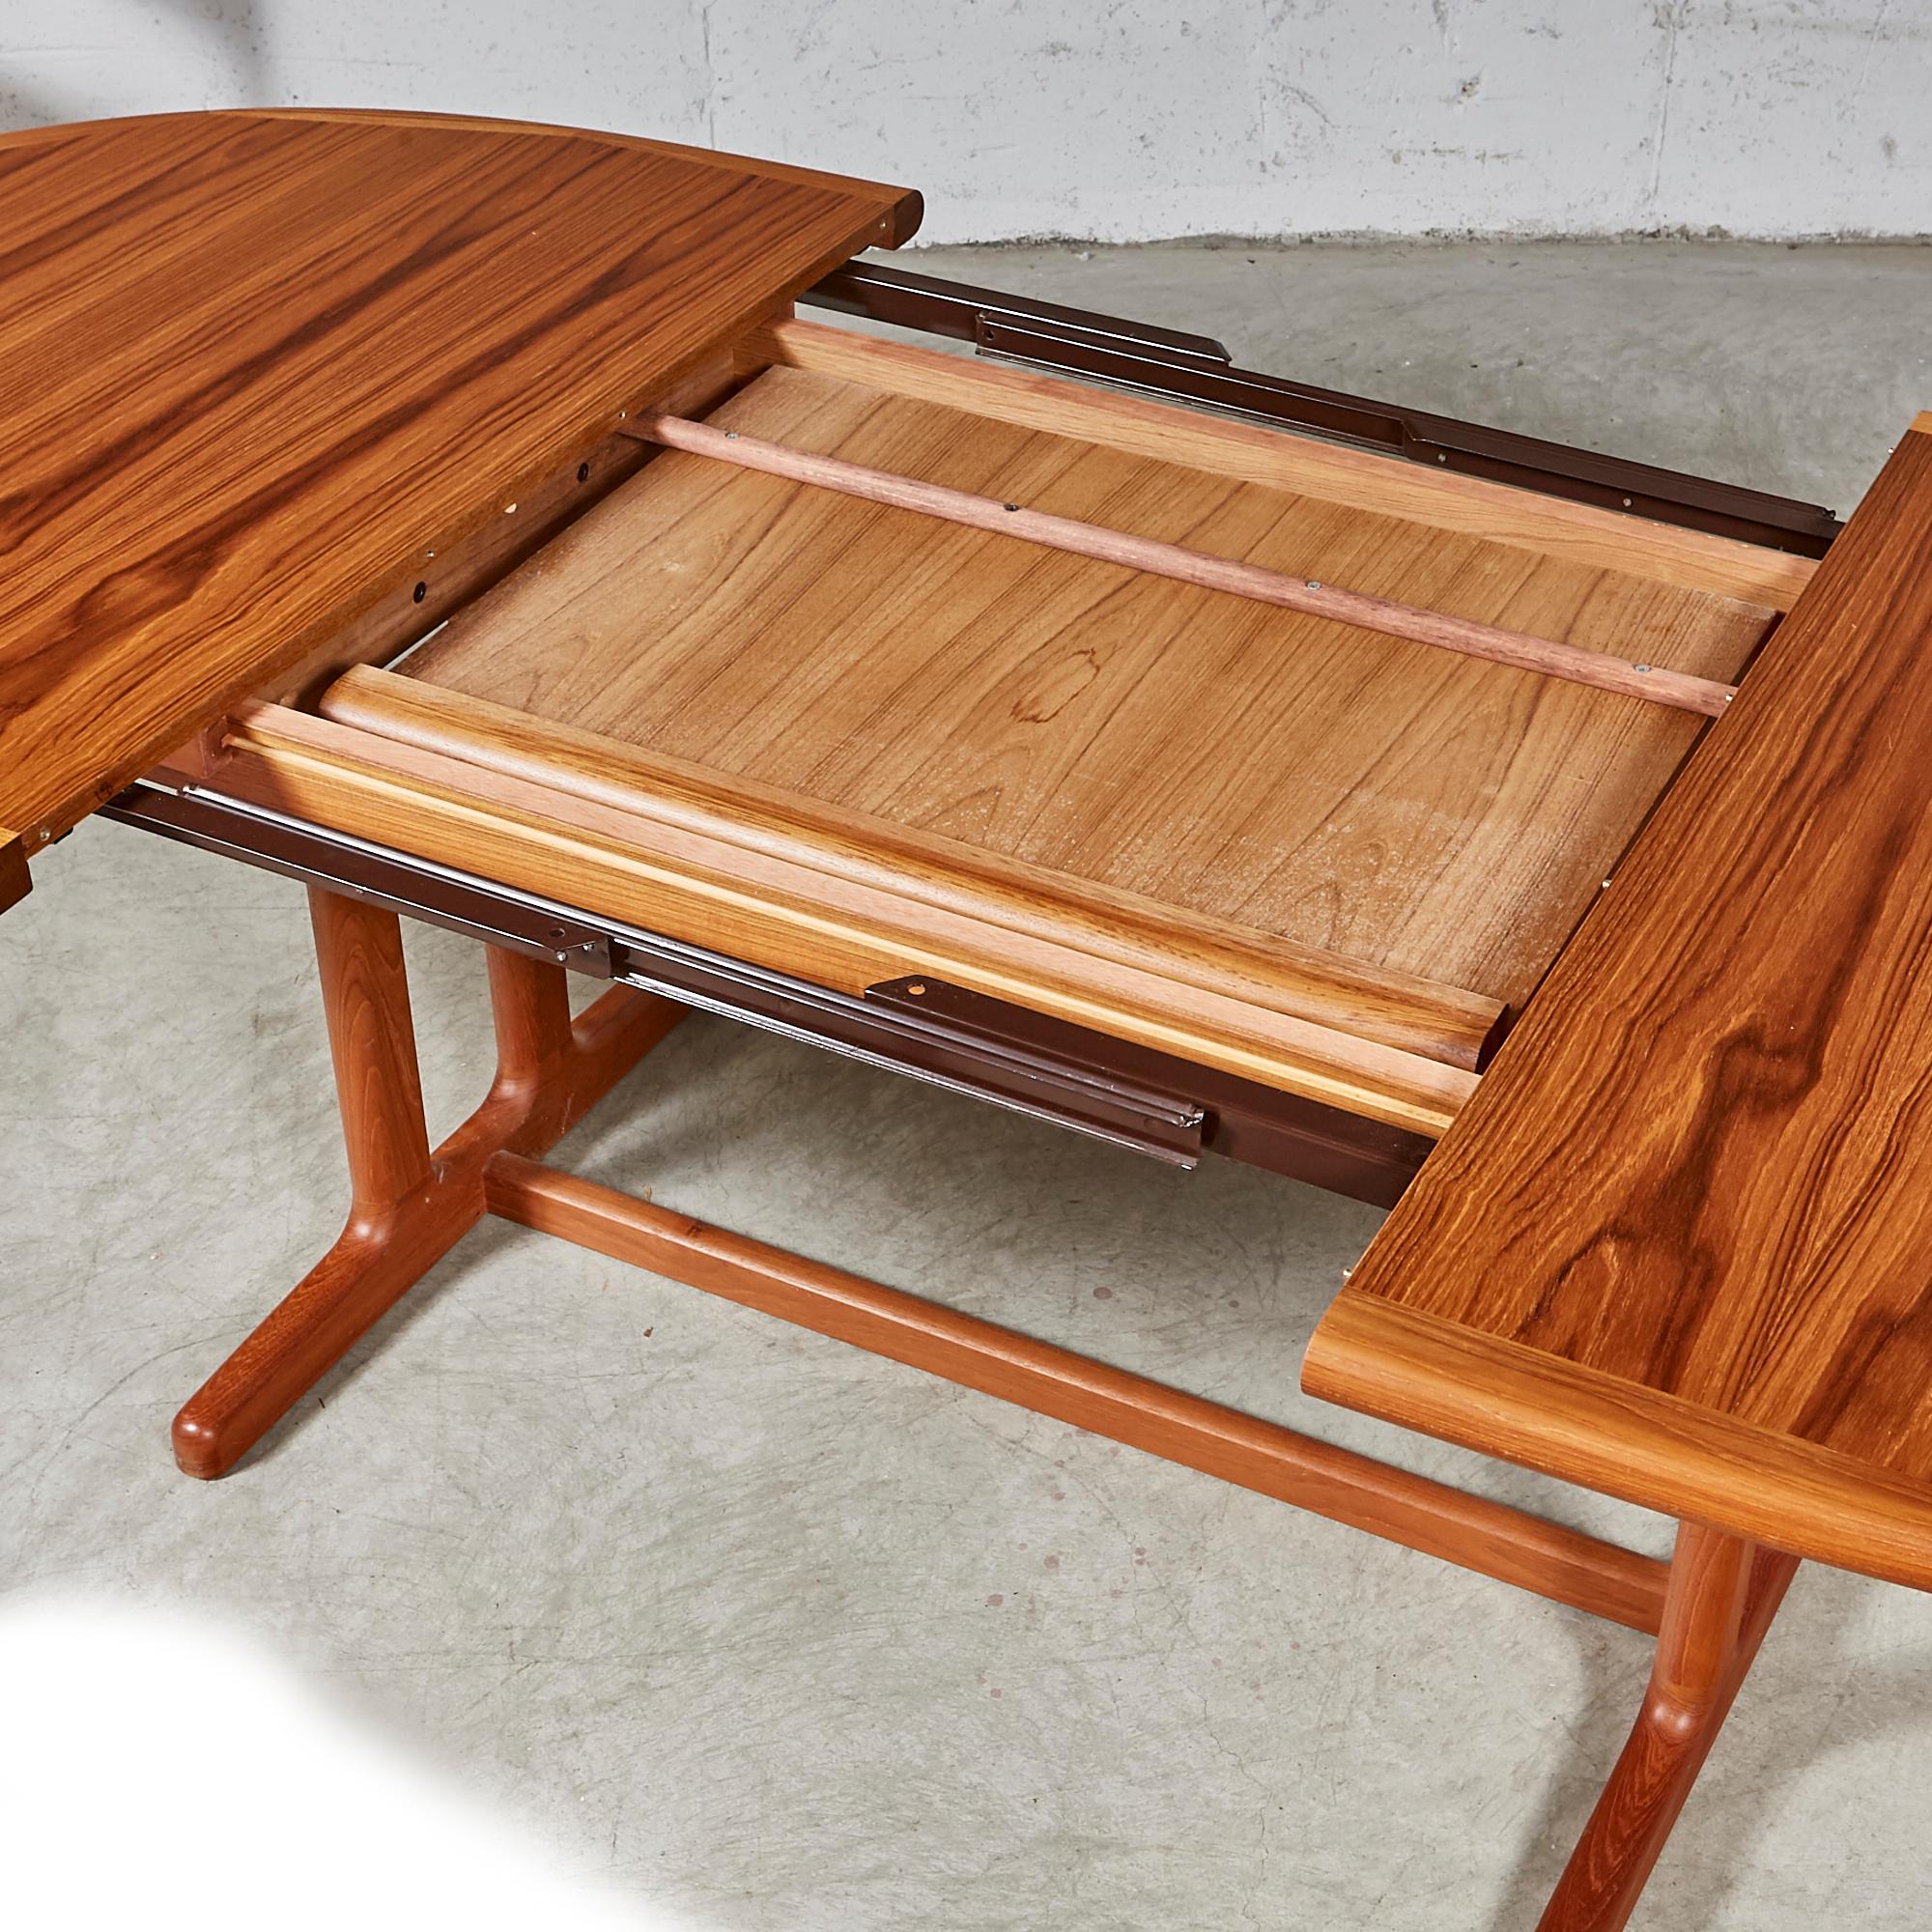 1970s Teak Dining Table and Chairs im Angebot 1